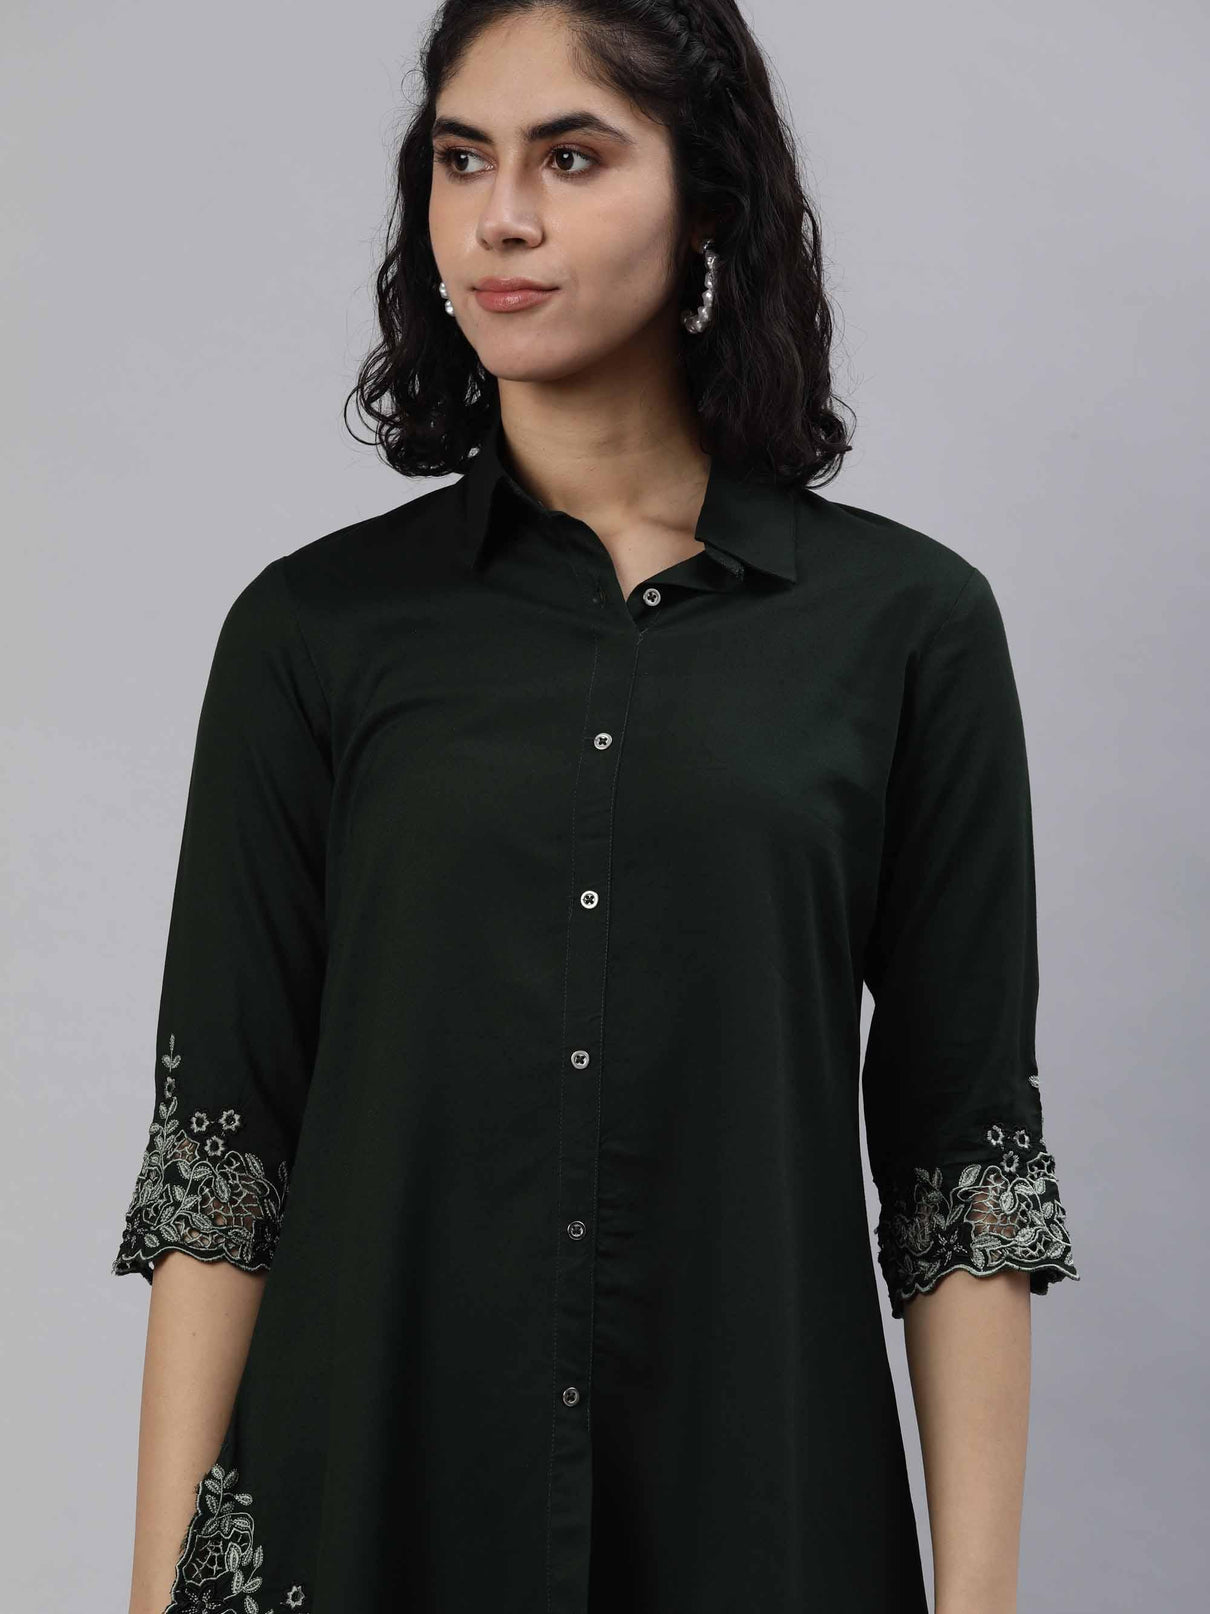 Solid Colored Top With Cutwork Embroidery in Front and Sleeves - Etiquette Apparel